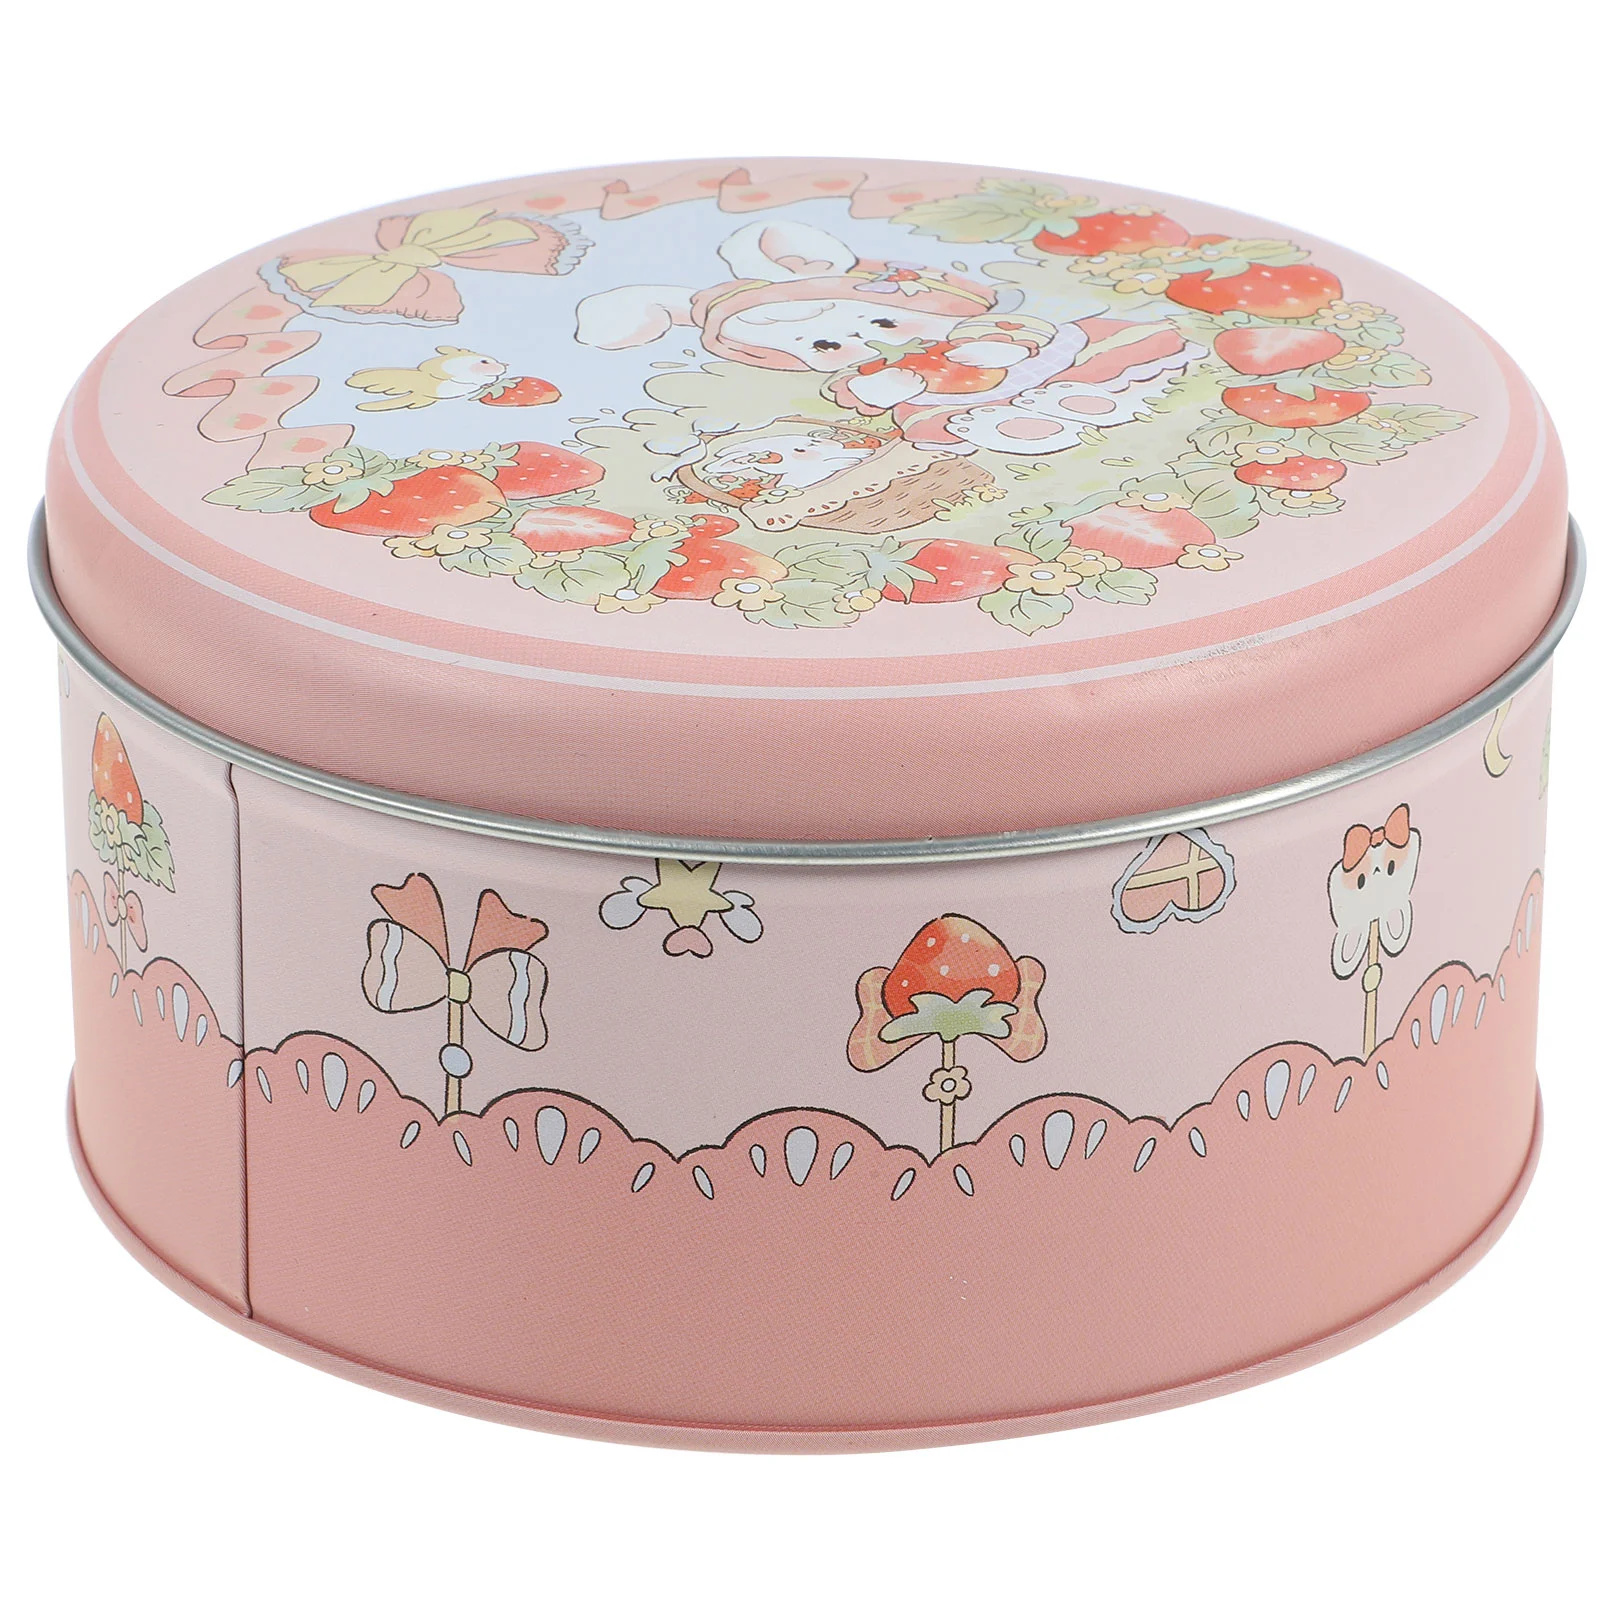 

Easter Cookie Tins Round Baking Cake Gift Tins Rabbit Bunny Strawberry Pattern Tinplate Empty Tins Box Candies Boxes